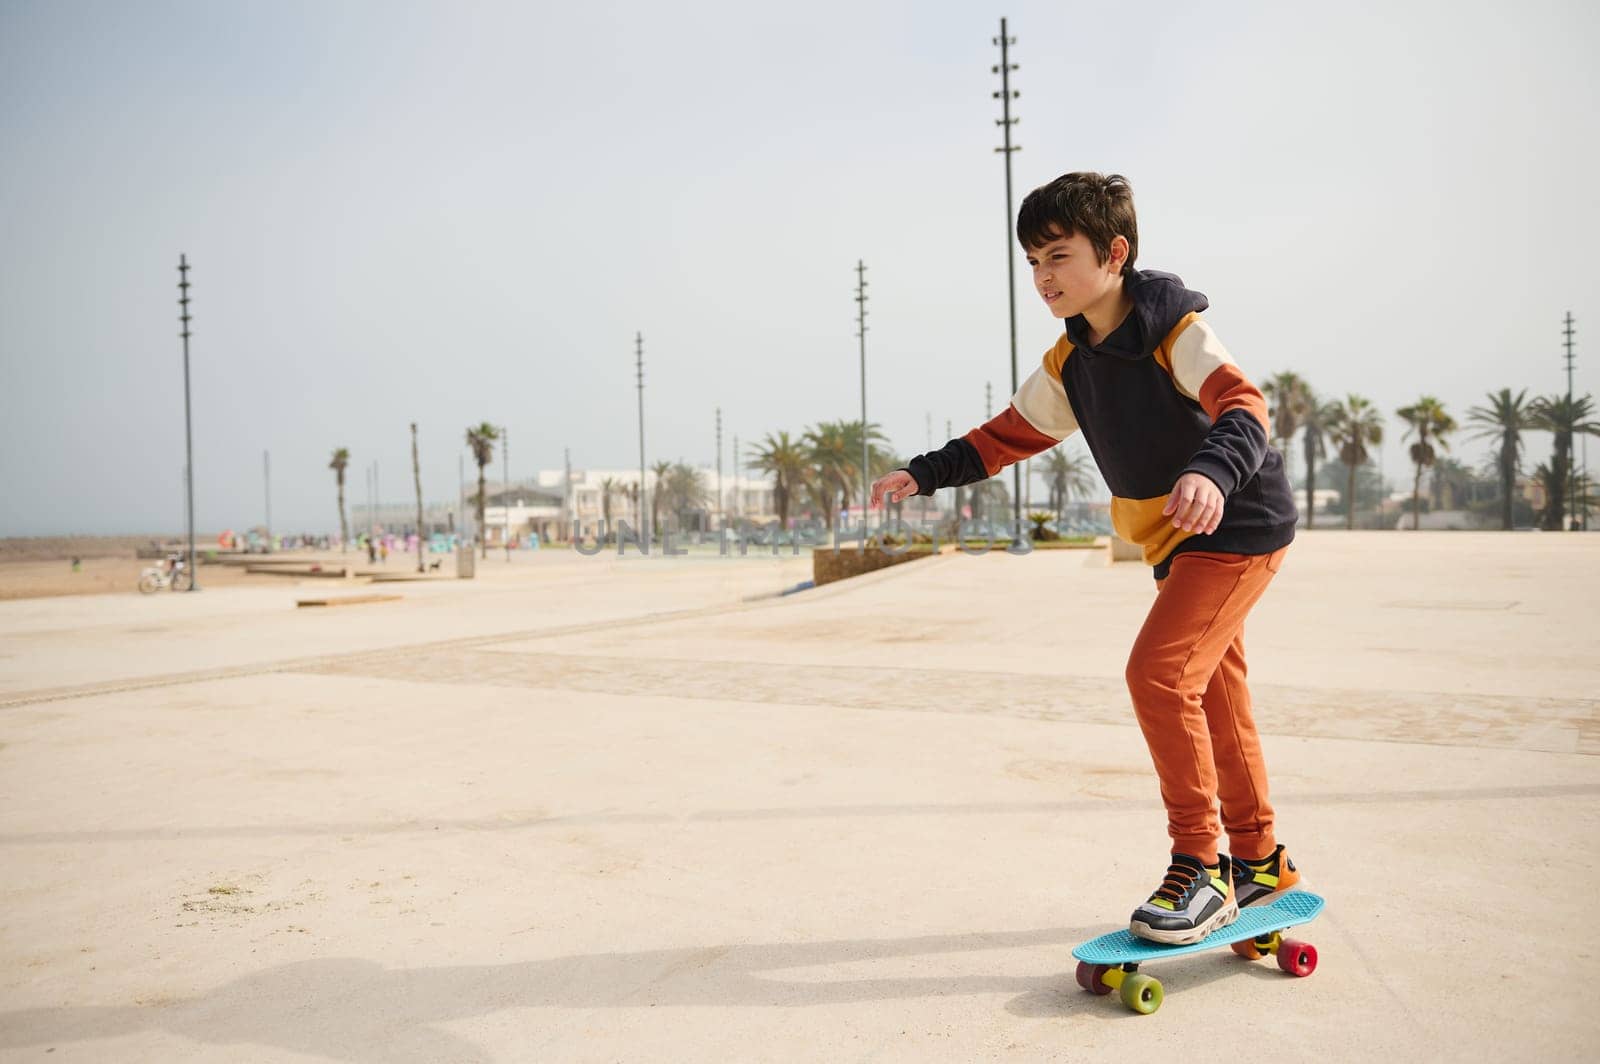 Happy active teenage boy riding on skateboard on an urban skatepark playground, dressed in stylish sportswear. Extreme sport, Happy carefree childhood. Active healthy lifestyle concept